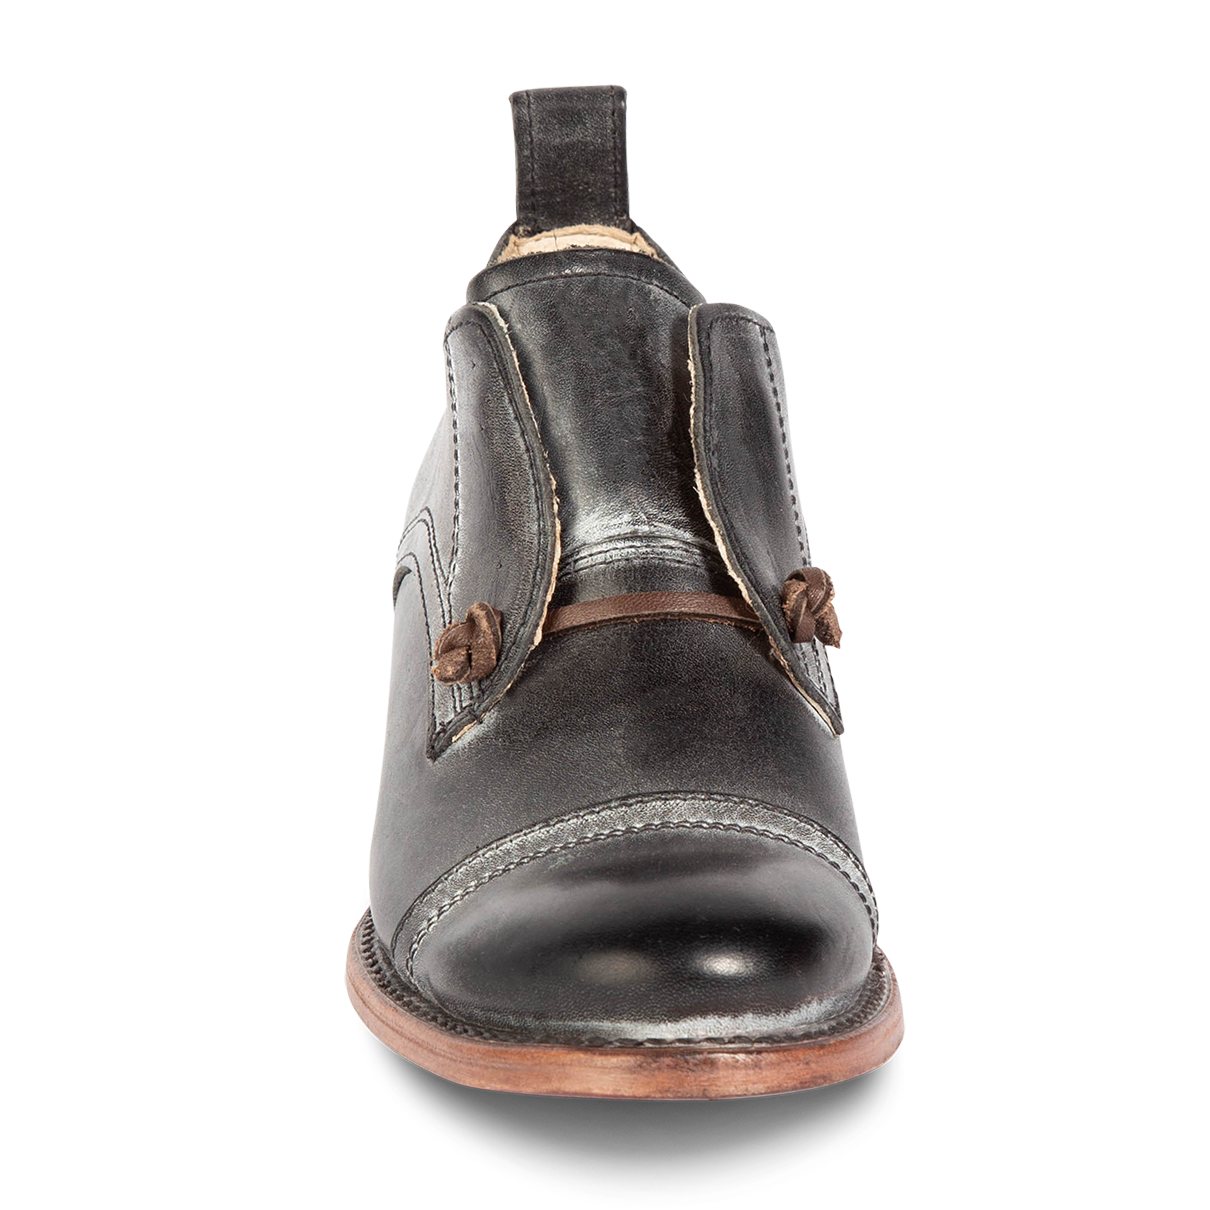 Front view showing decorative knotted leather lace and hidden elastic around tongue on FREEBIRD women's Mabel black shoe